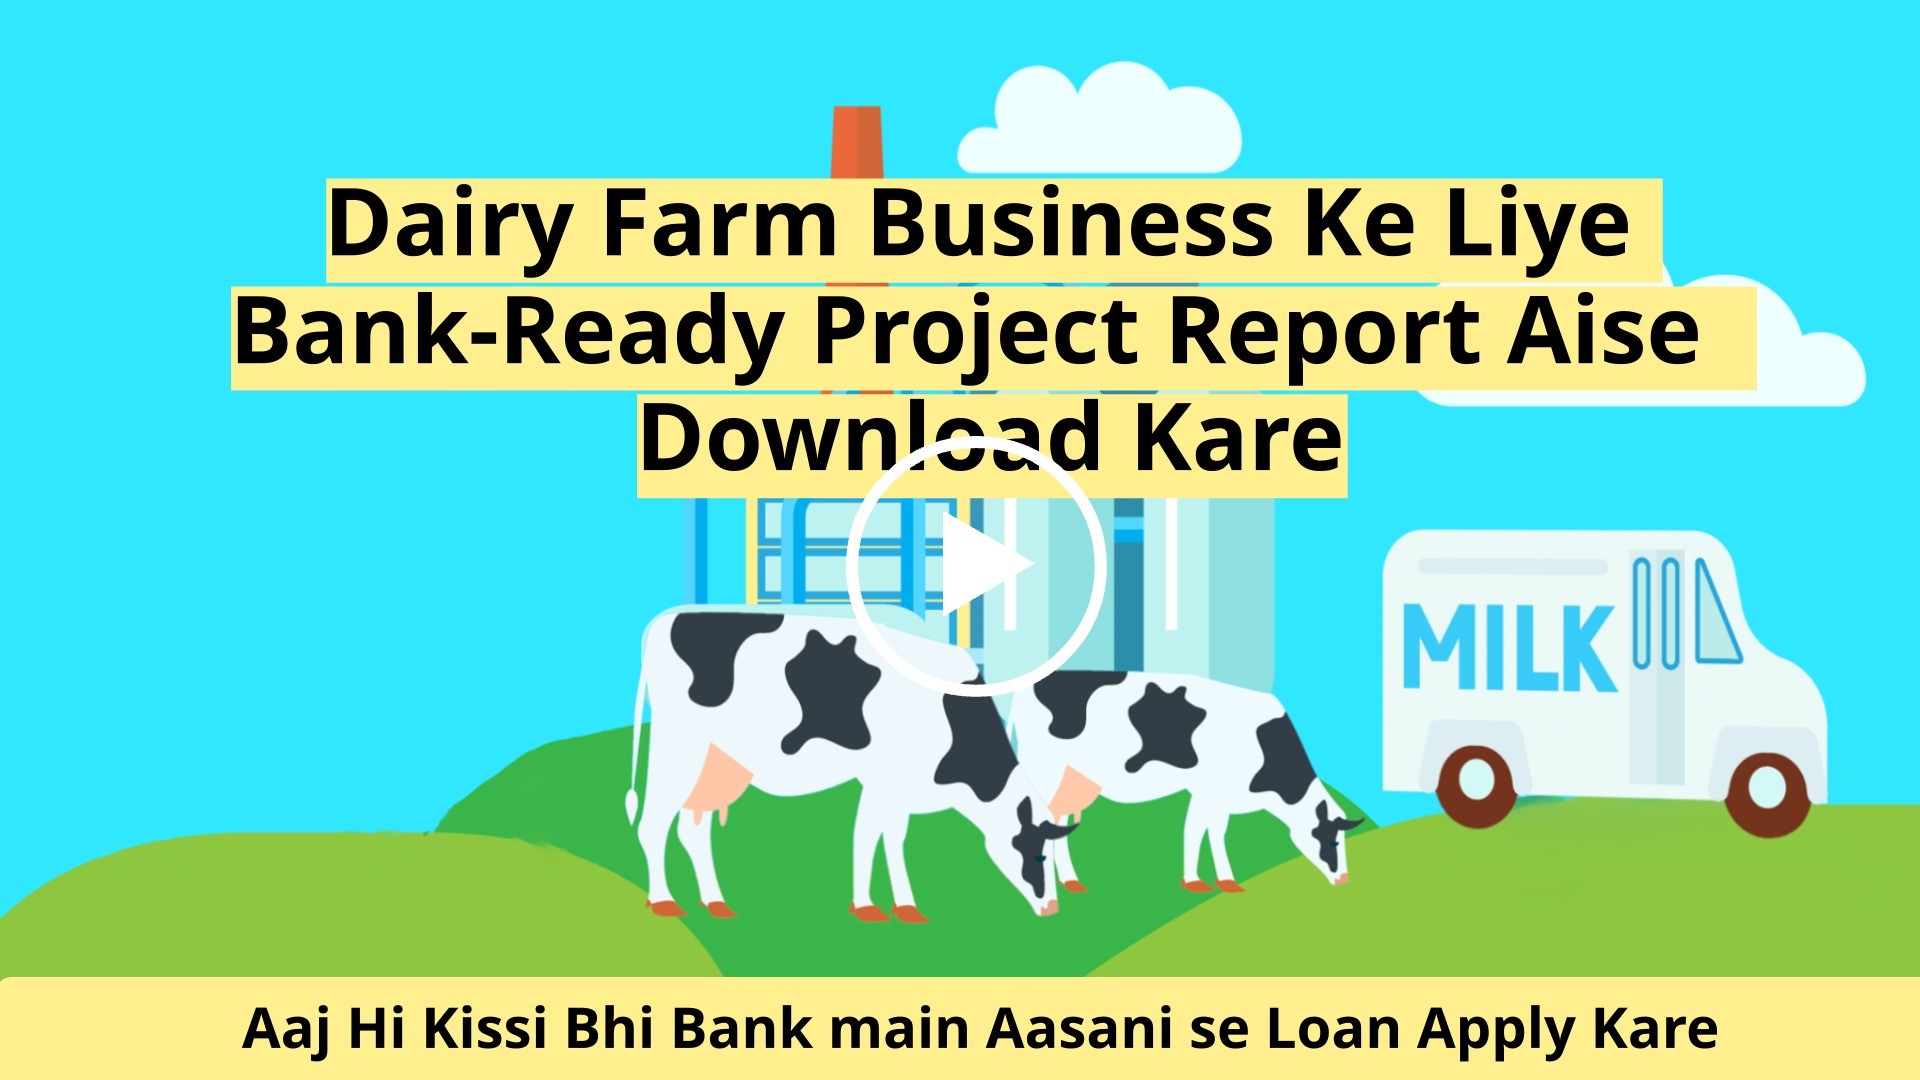 https://fortriskconsulting.com/wp-content/uploads/2023/02/How-to-make-Dairy-Farm-project-report.jpg